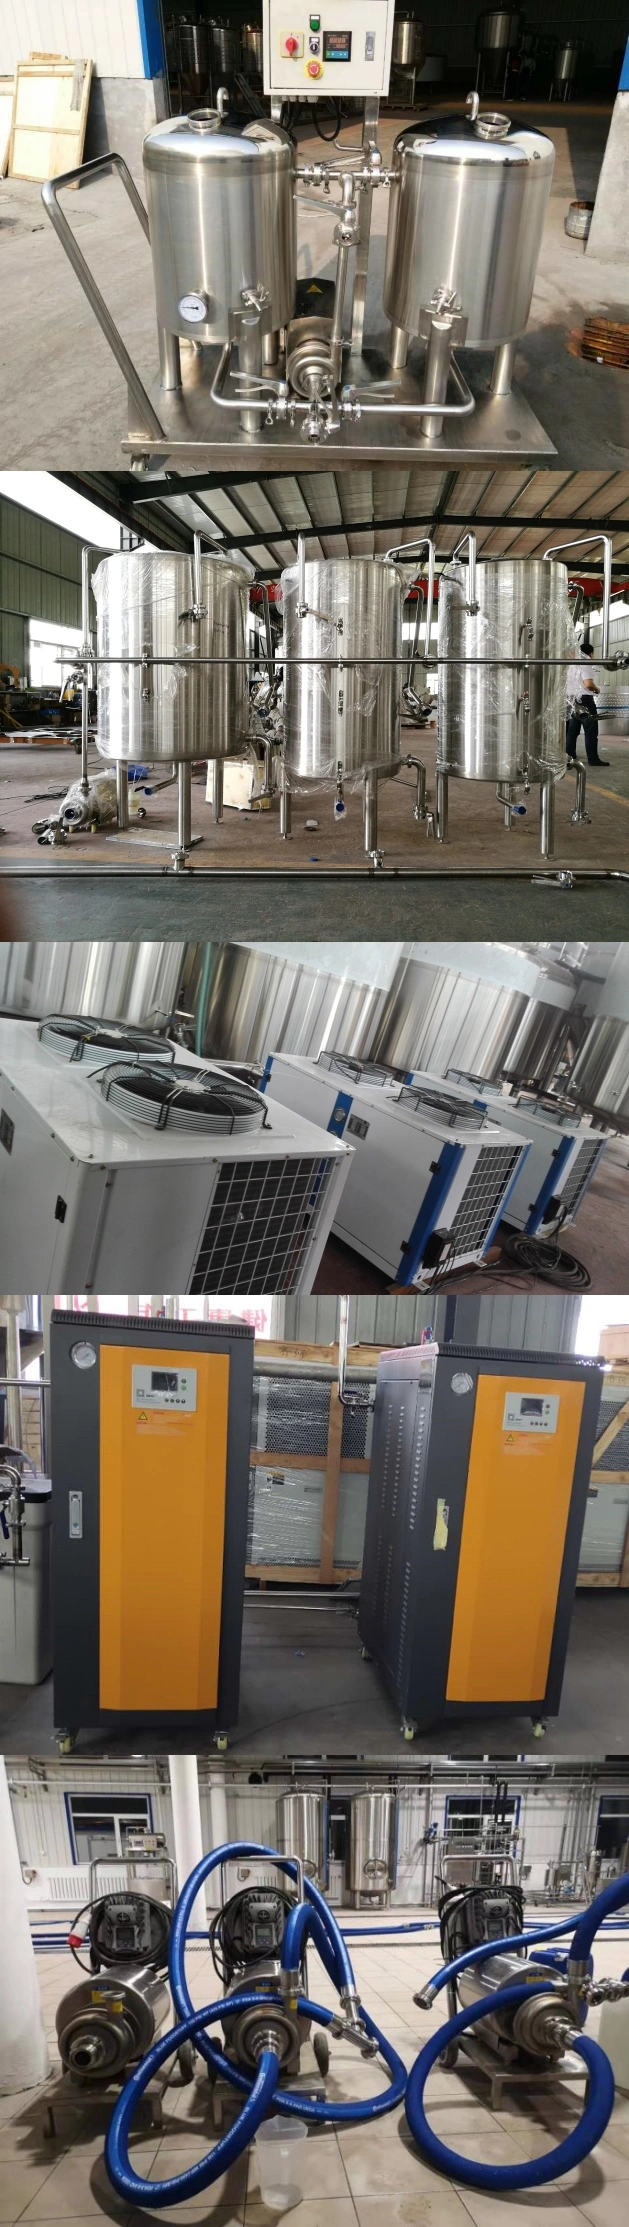 Commercial Craft Beer Brewery Equipment for Sale